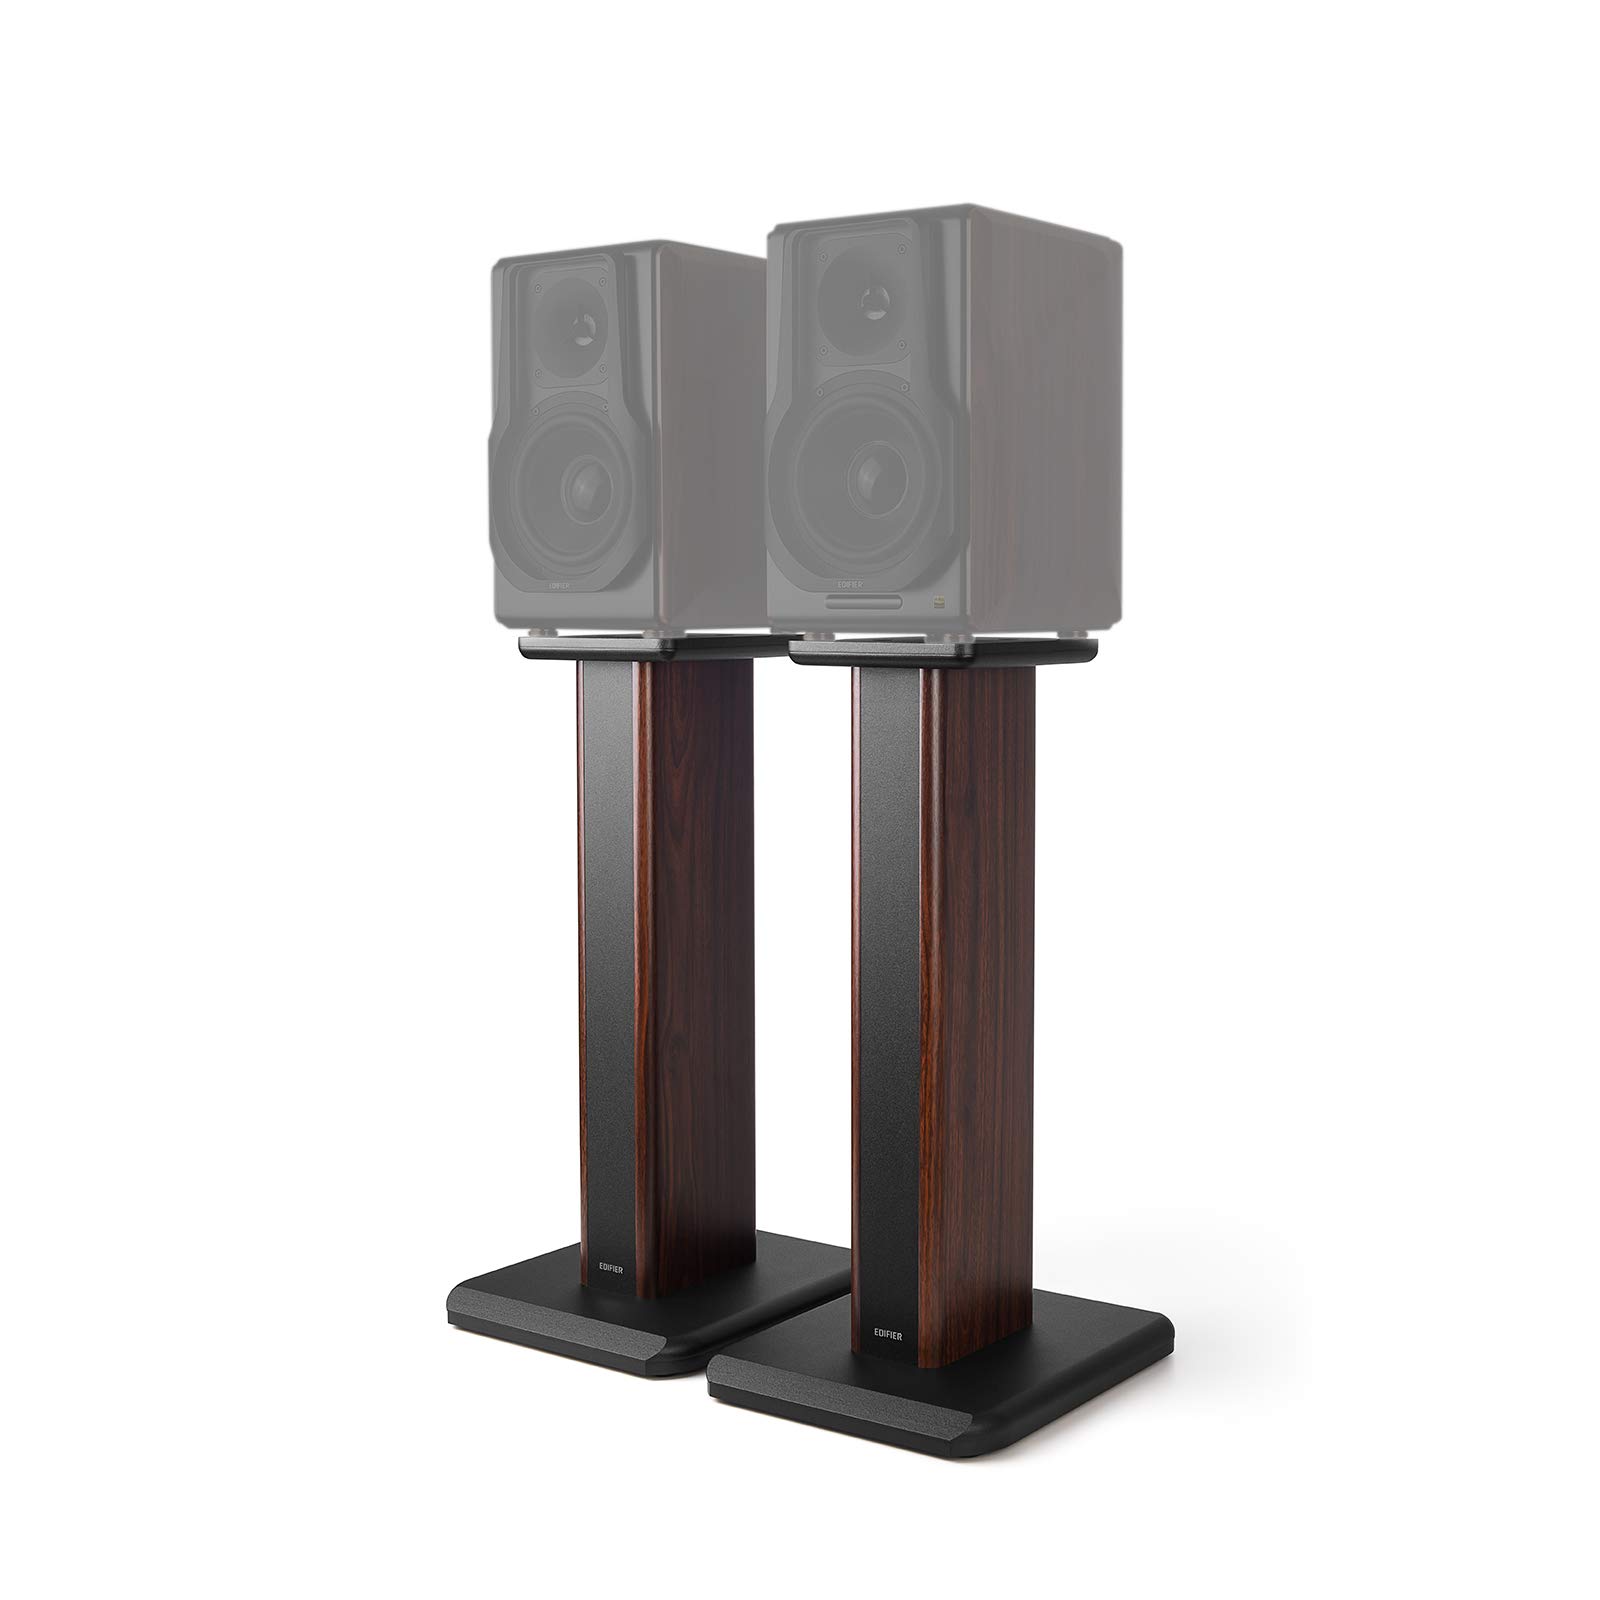 Edifier Speaker Stands for S3000PRO 25.6 inch Hollowed ...